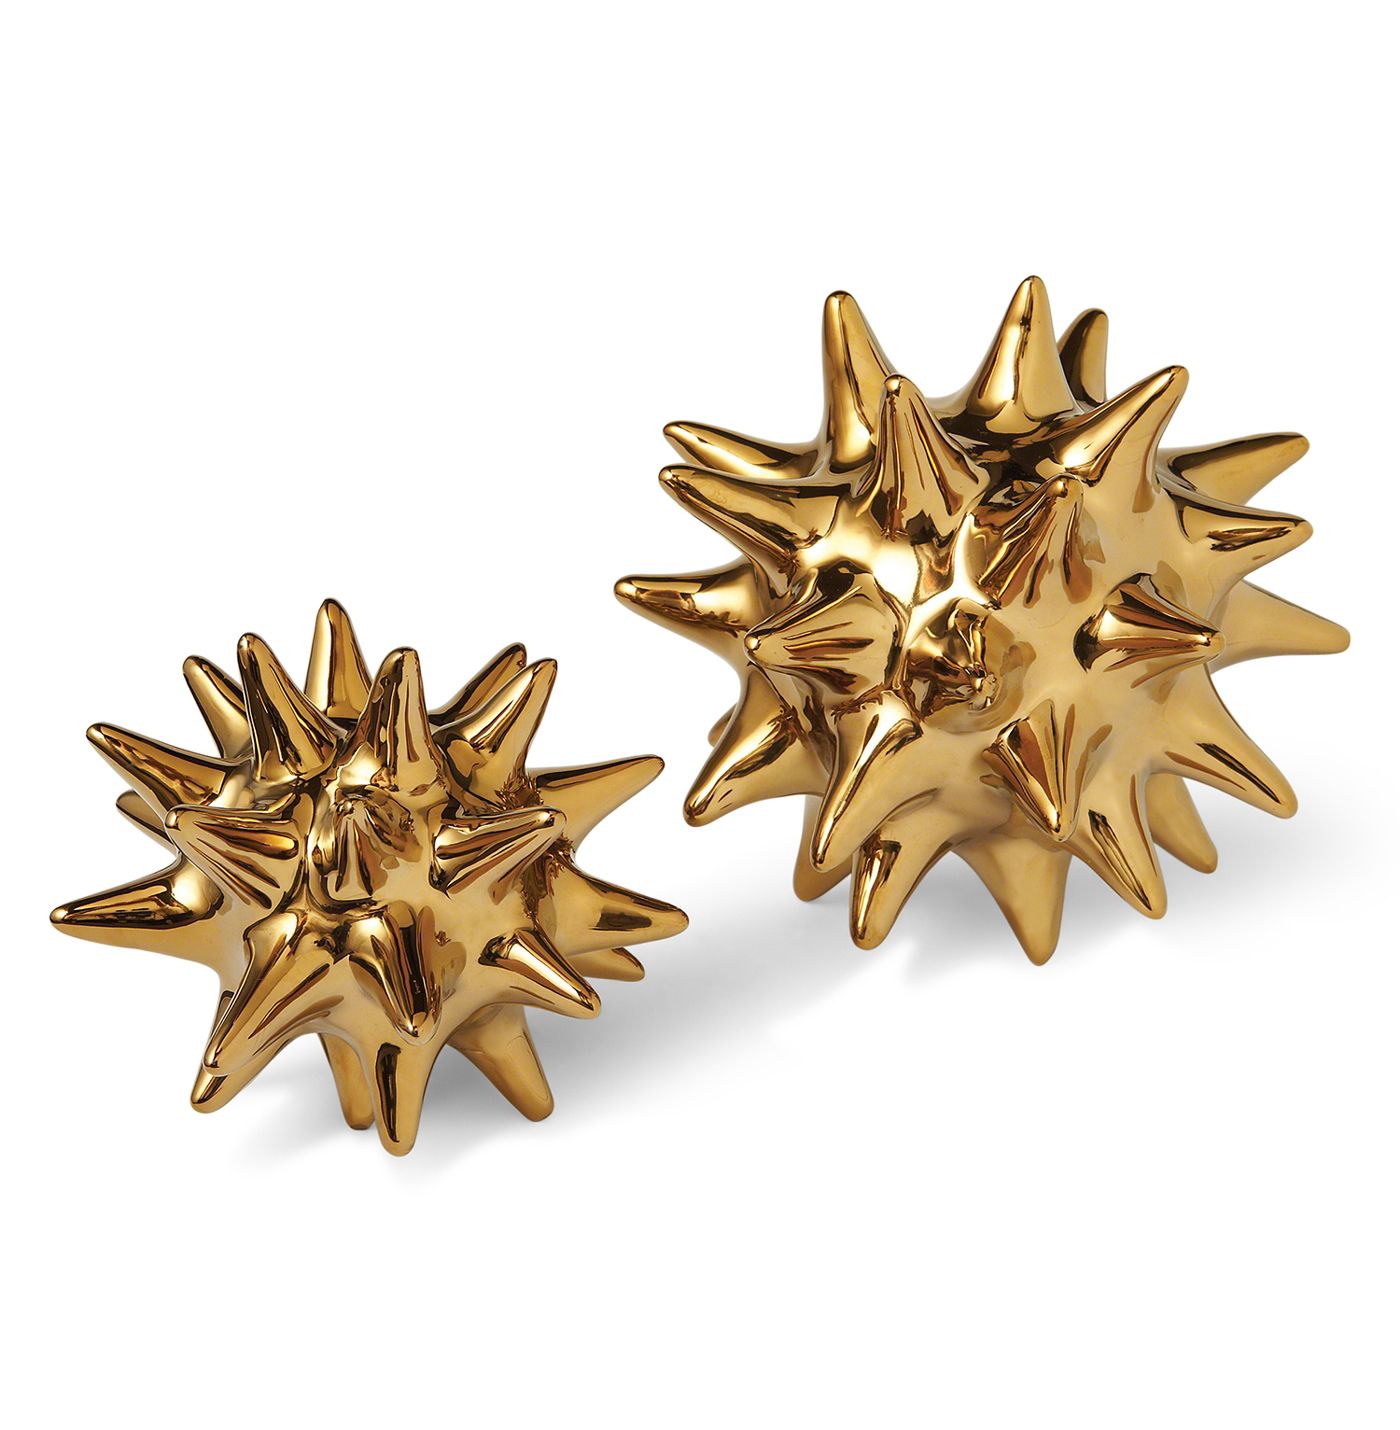 Cousteau Coastal Beach Bright Gold Sea Urchin Sculptures - Set of 2 | Kathy Kuo Home